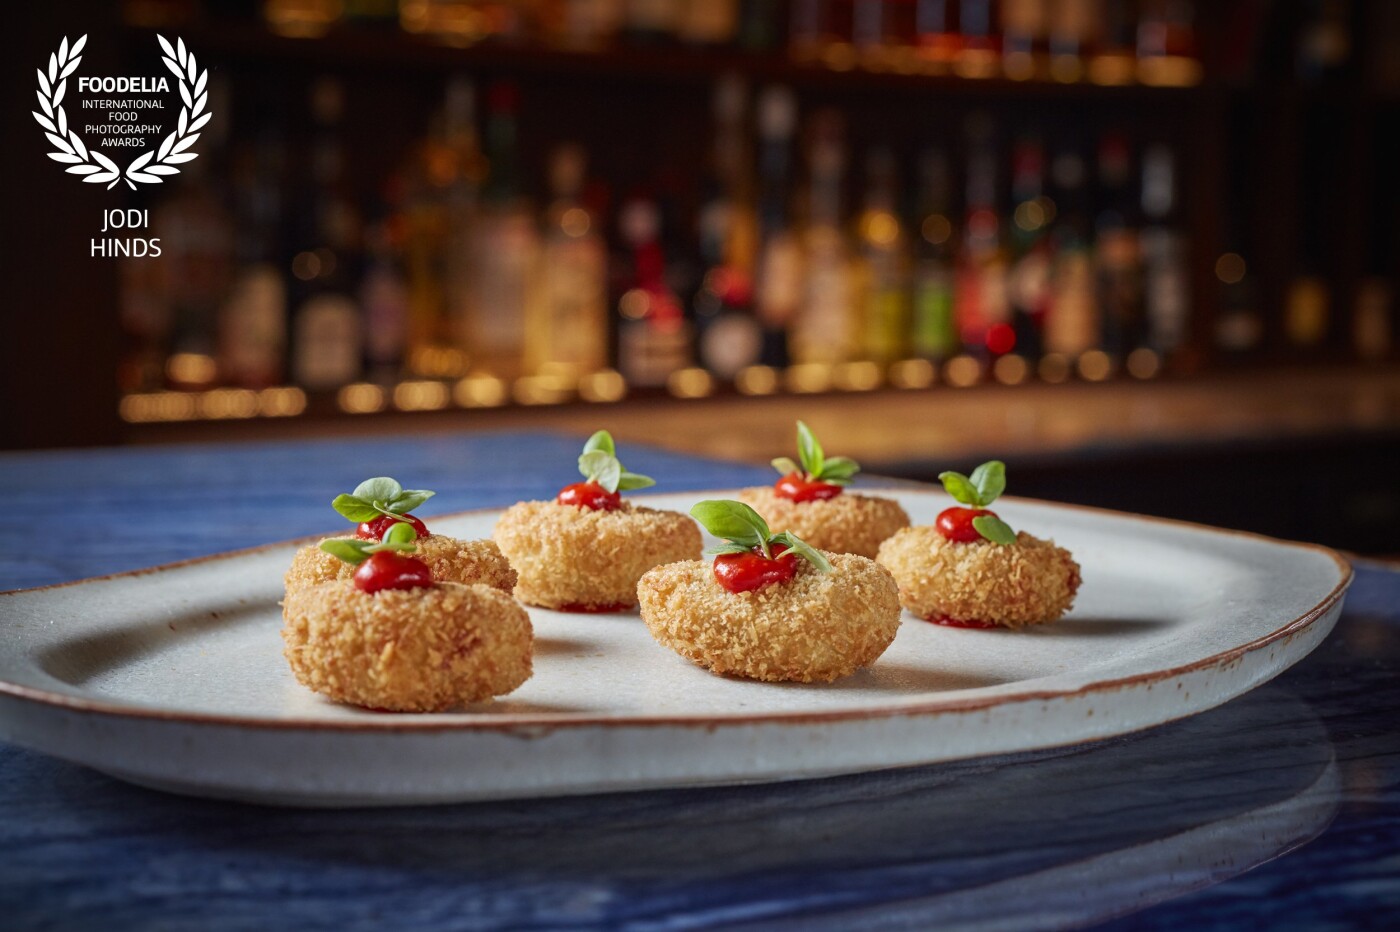 Gorgeous little bar bites of sumptuous croquettes from the newly opened Dickie's Bar, UK with the help of the amazing team at The Dead Rabbit, NY.<br />
<br />
Chef: @rosspotsnpans<br />
Bar: @dickies_bar<br />
Restaurant: @corrigans_mayfair<br />
Owner: @chefcorrigan<br />
Photographer: @jodihindsphoto